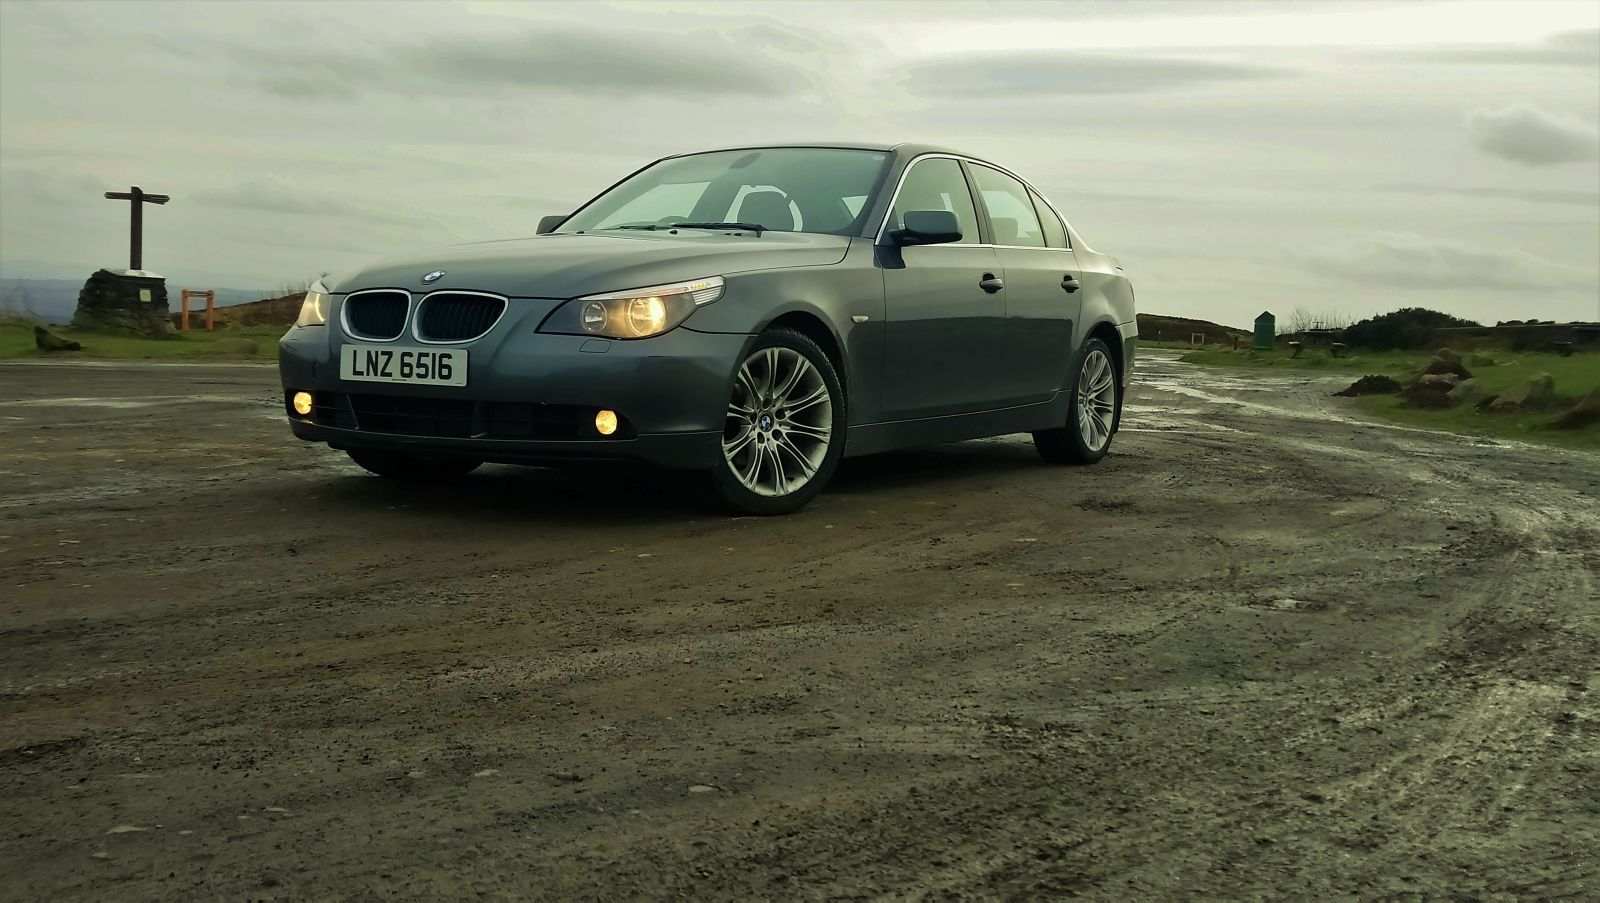 Illustration for article titled Cheapest E60 BMW 525d In Scotland: 1 Year Review